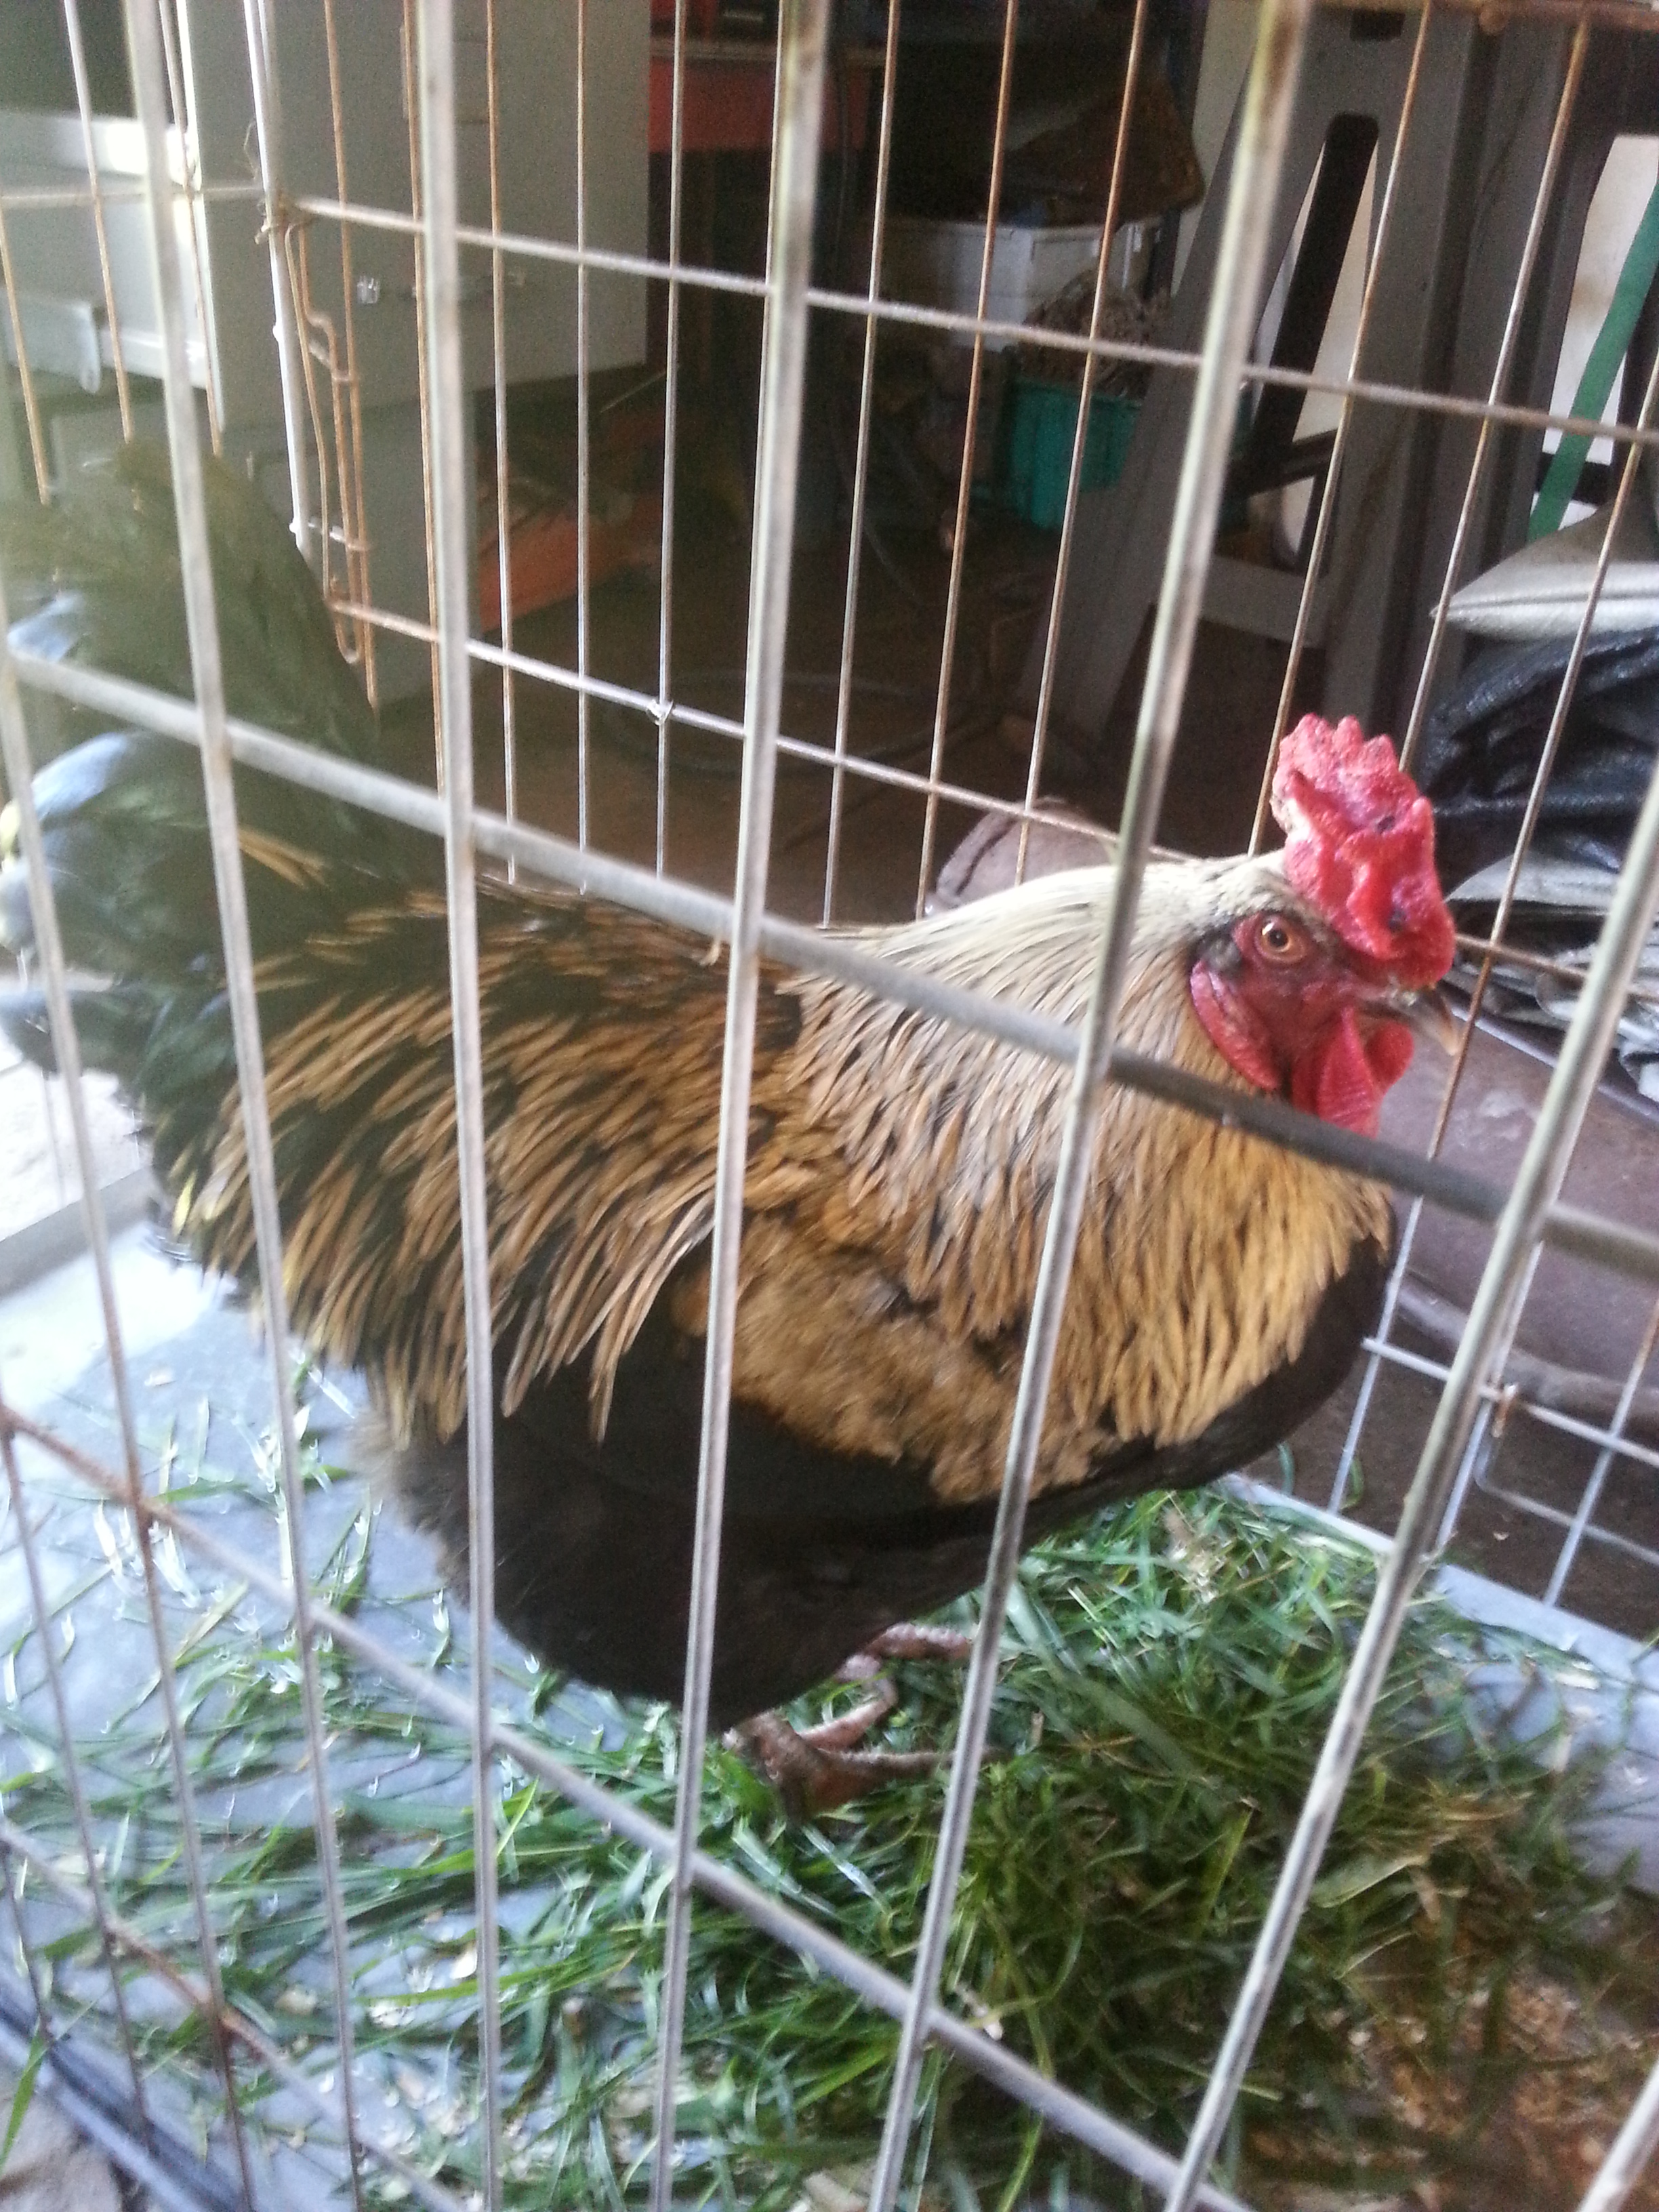 My stunning Australorp Rooster. He's loving life with his ladies. We're pretty sure he's up in years, but it seems its means he's calm and doesn't mind us fussing in the pen.